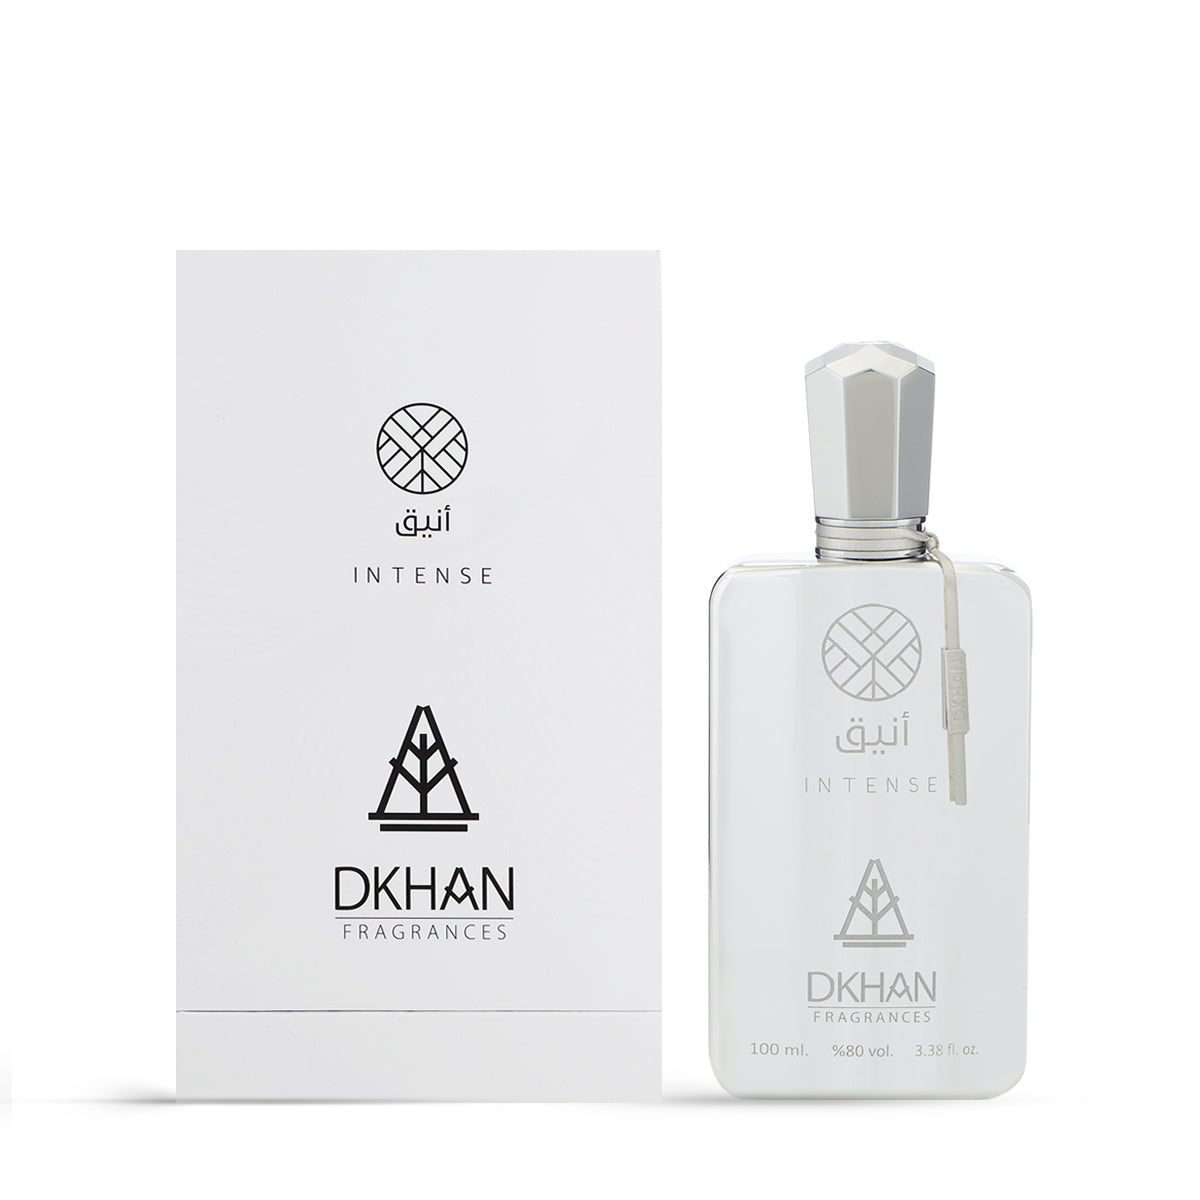 This image presents a sophisticated white perfume bottle alongside its packaging. The bottle, labeled Aneeq Intense, holds 100 ml or 3.38 fl. oz. and features a 98% volume concentration. Its design is minimalistic with clean lines, a geometric faceted cap, and a transparent label showcasing the DKHAN Fragrances logo—a heart within a diamond. A small, beige tag hangs from the bottle's neck. 